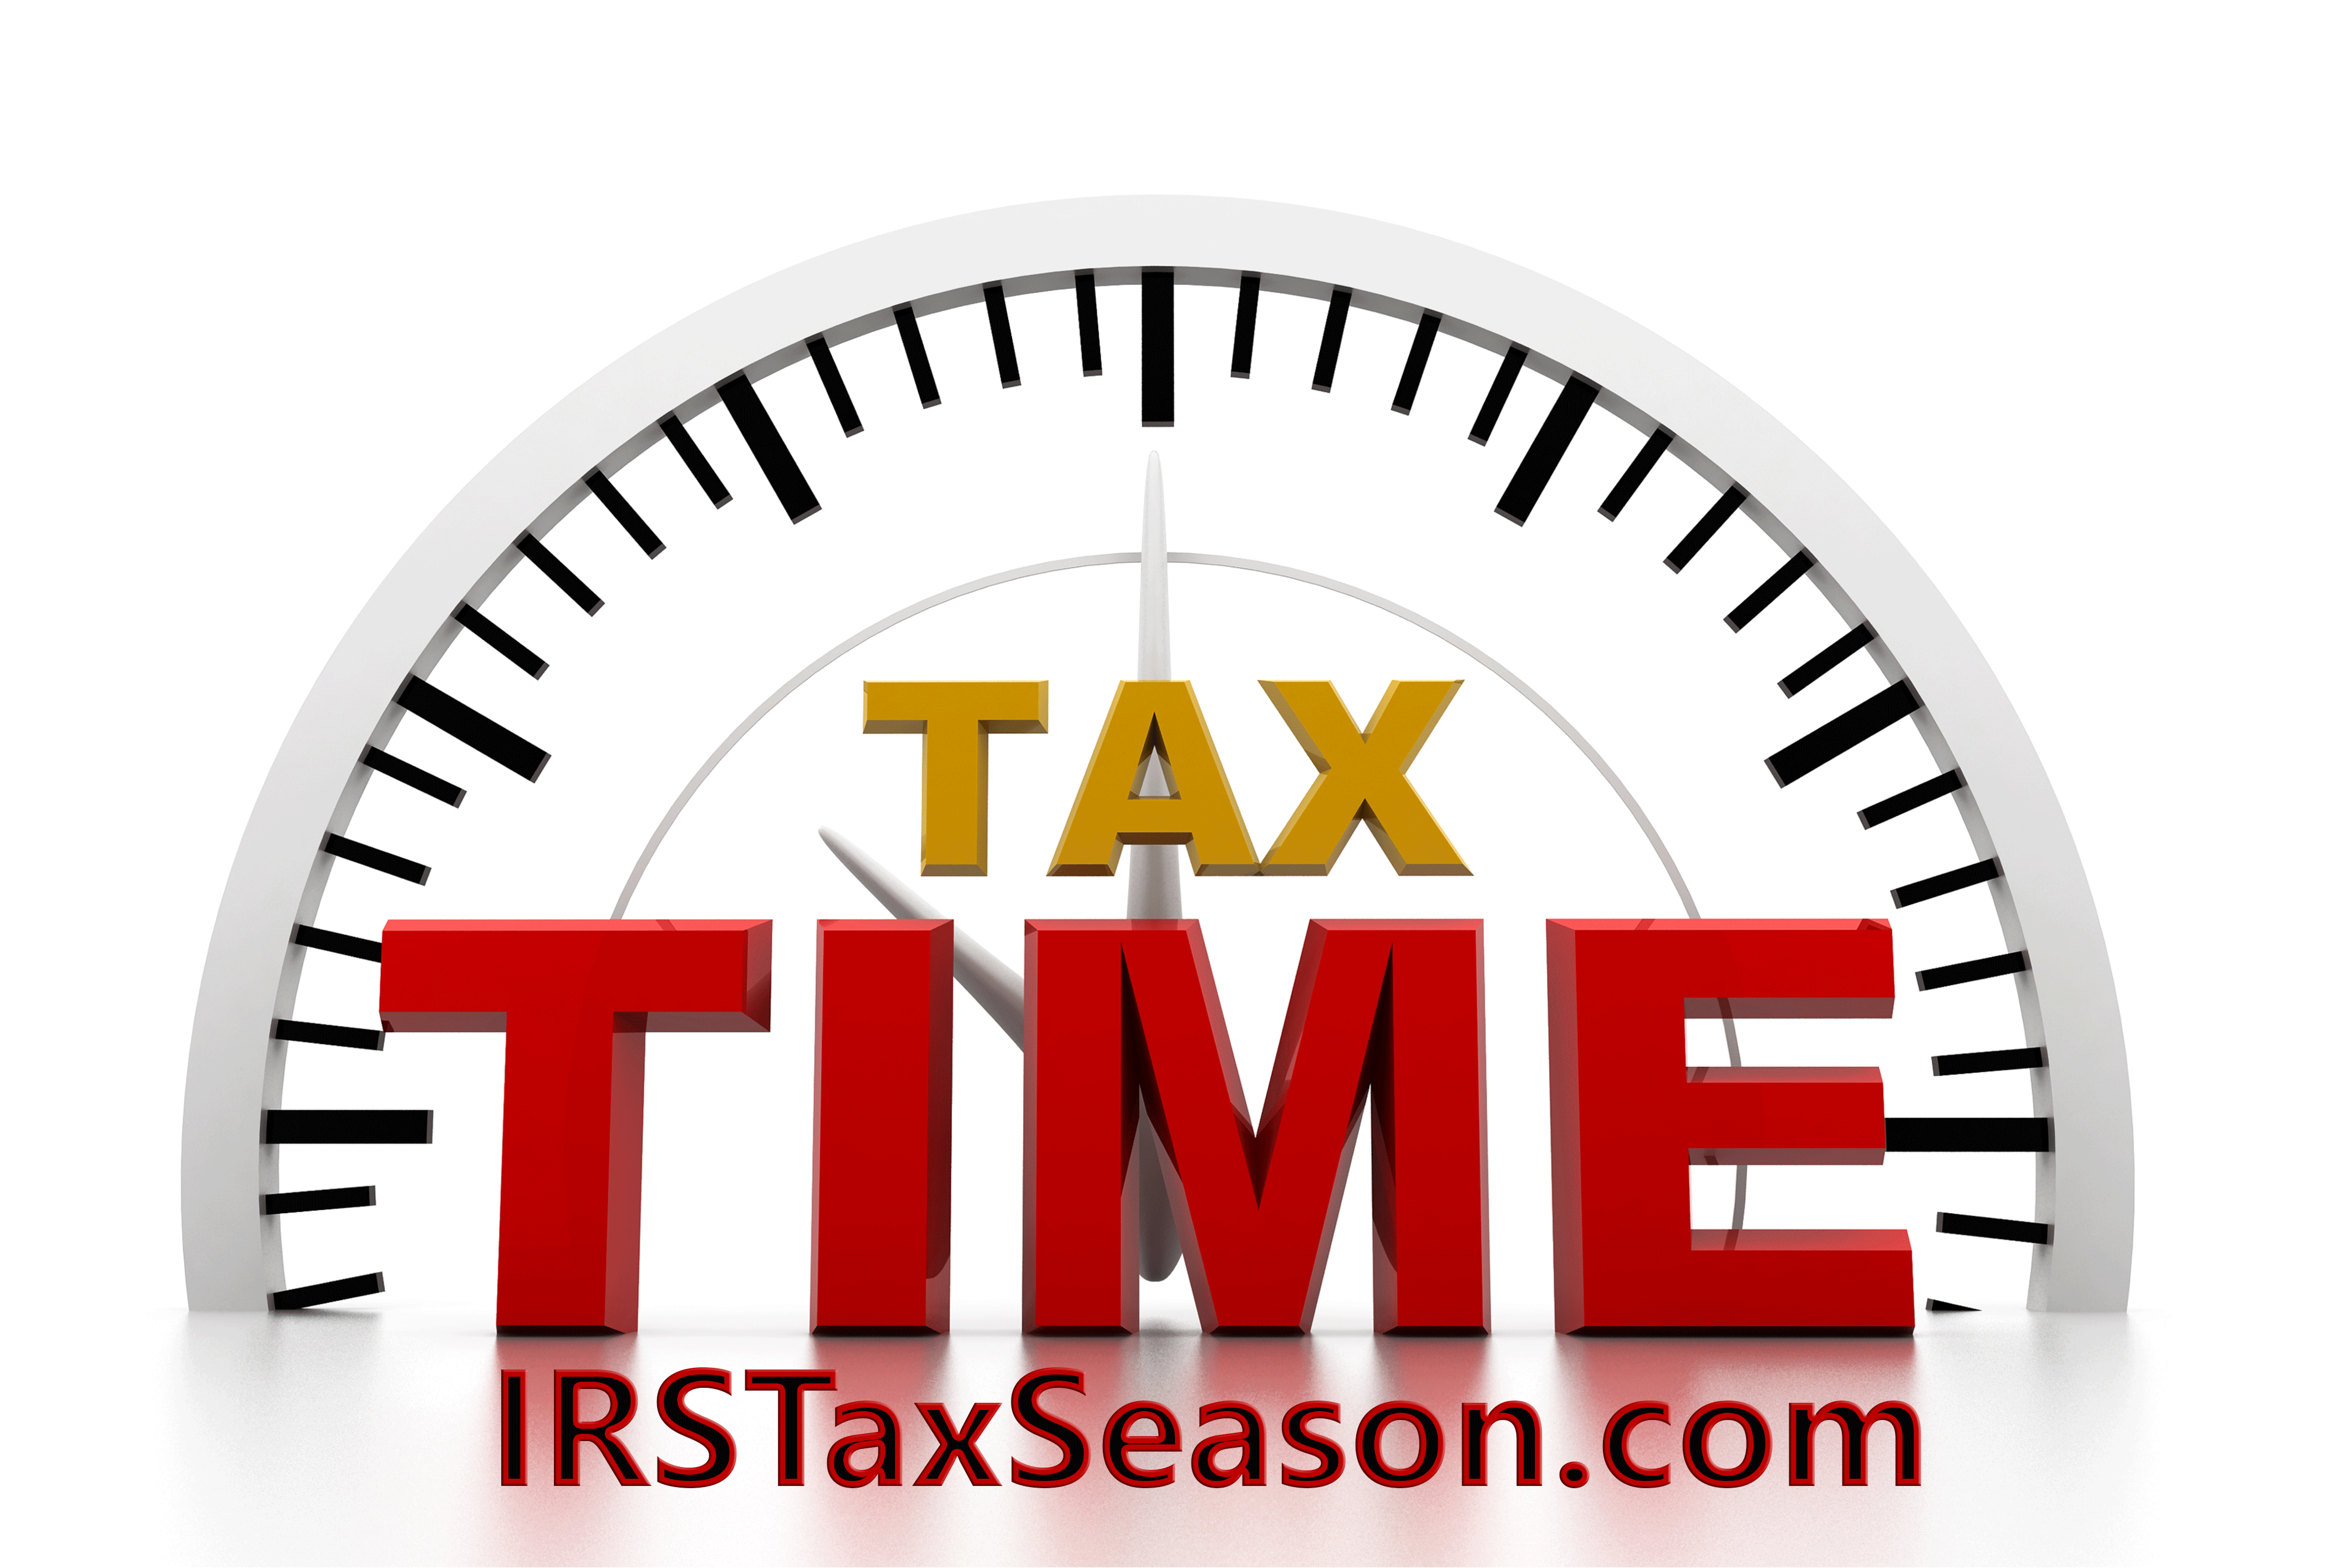 Taxes Due PNG Transparent Taxes Due.PNG Images. PlusPNG